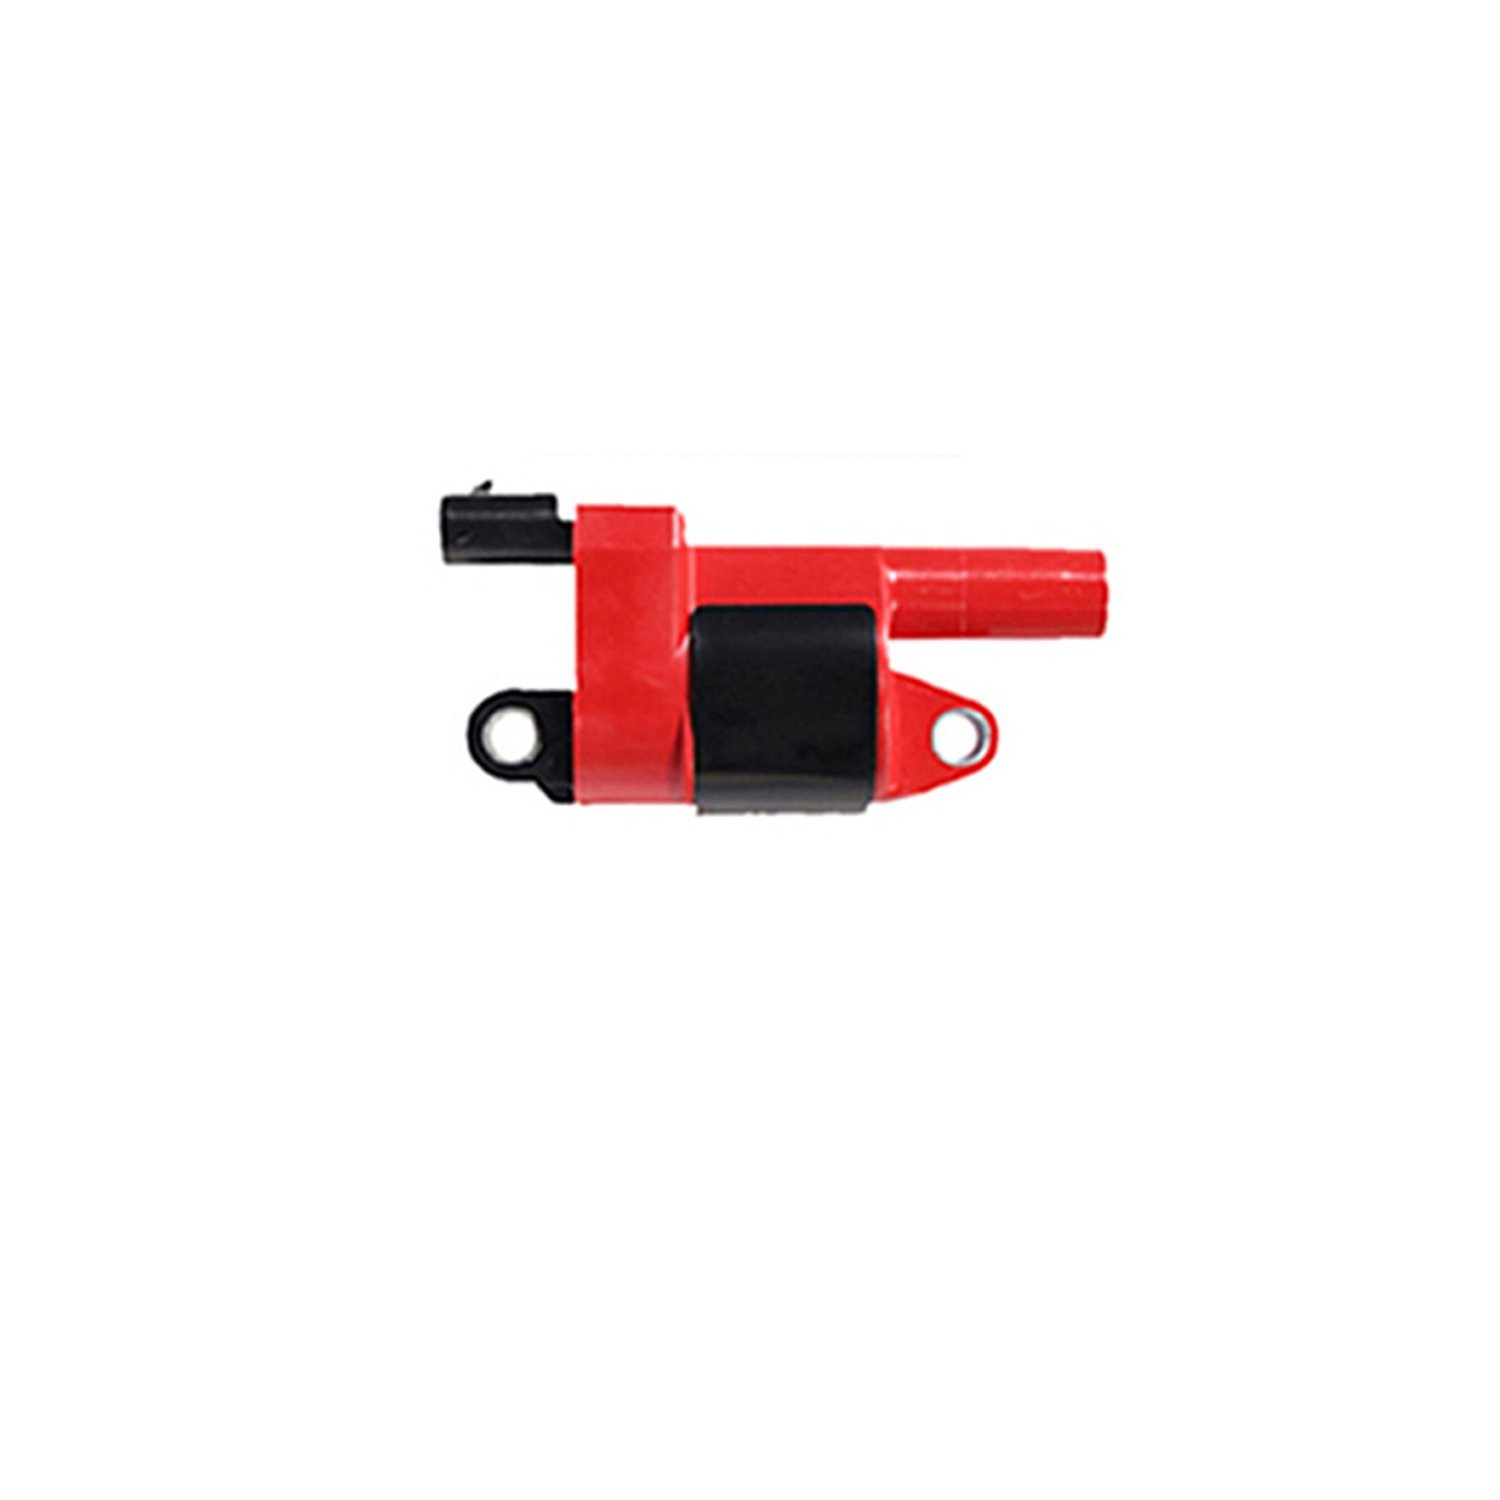 High-Performance Ignition Coil for GM 6.0L/5.3L [Red]